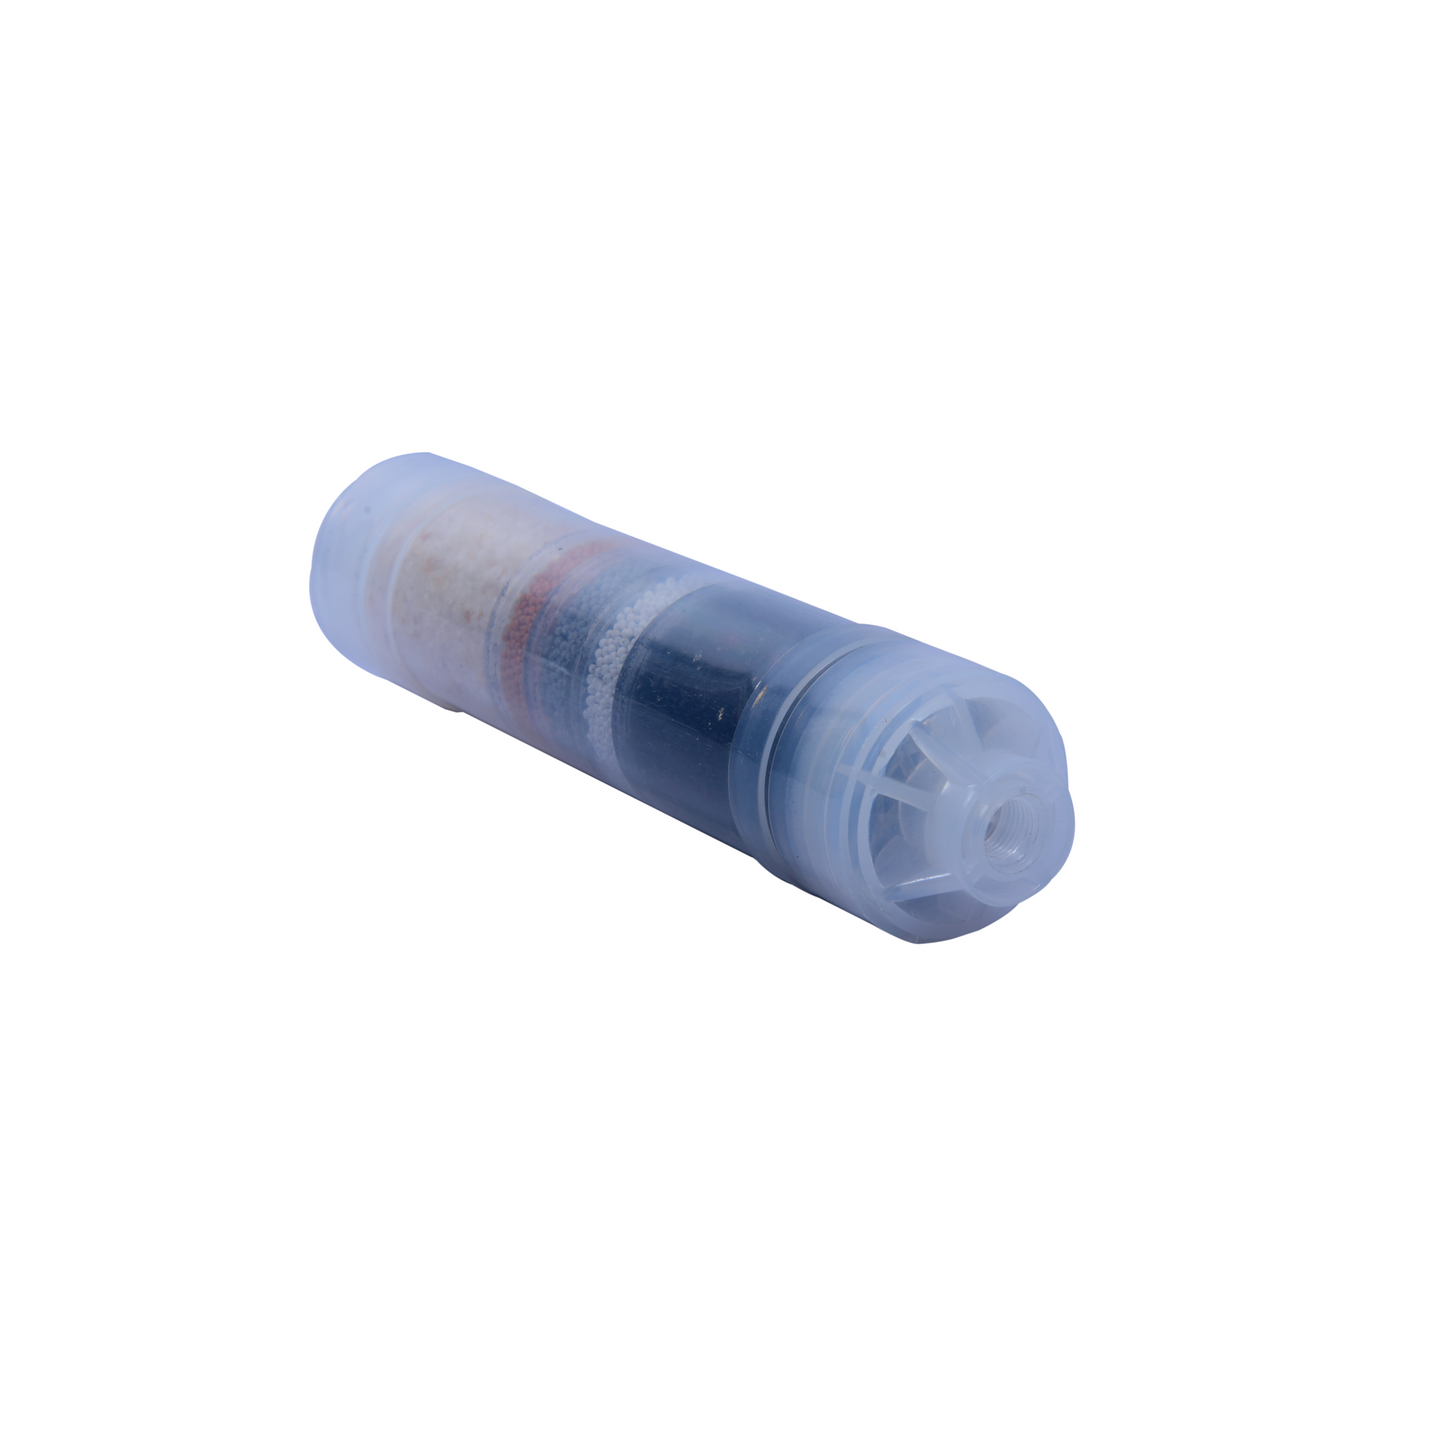 RO-MC-1 RO-Pure Mineral Cartridge for RO Water Purifier | RO spare parts